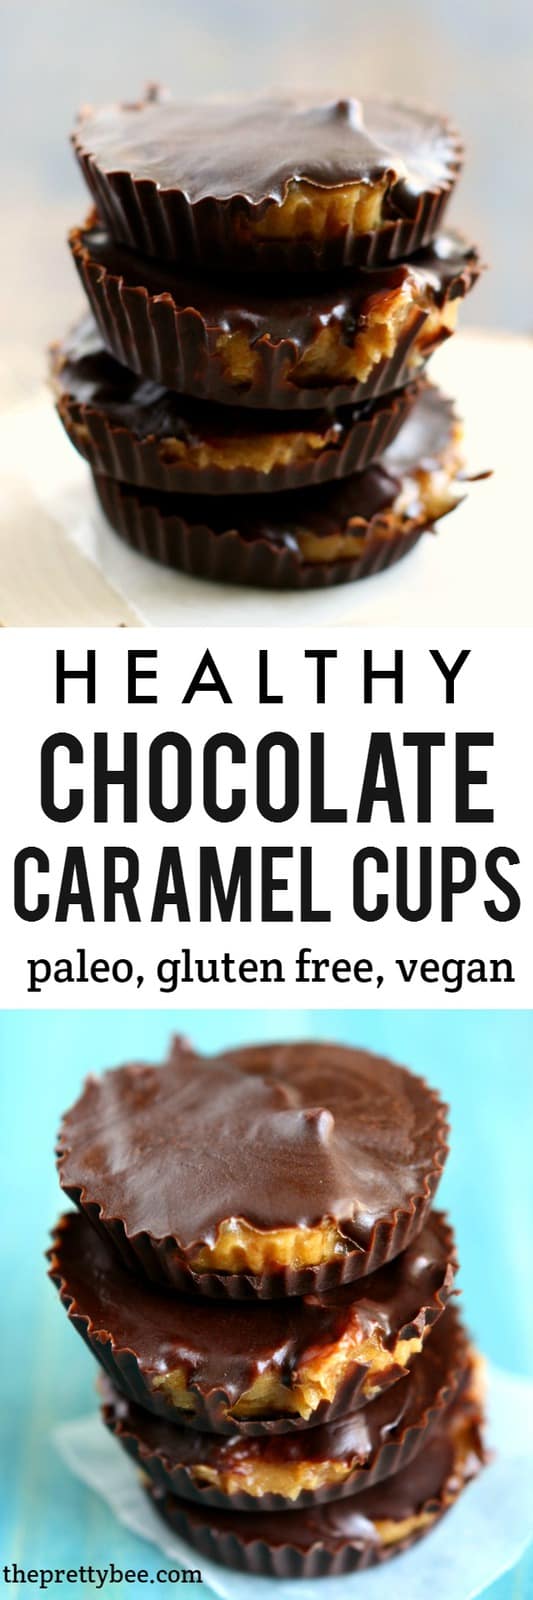 Paleo caramel chocolate cups are quick to make, and are a decadent and healthy treat!